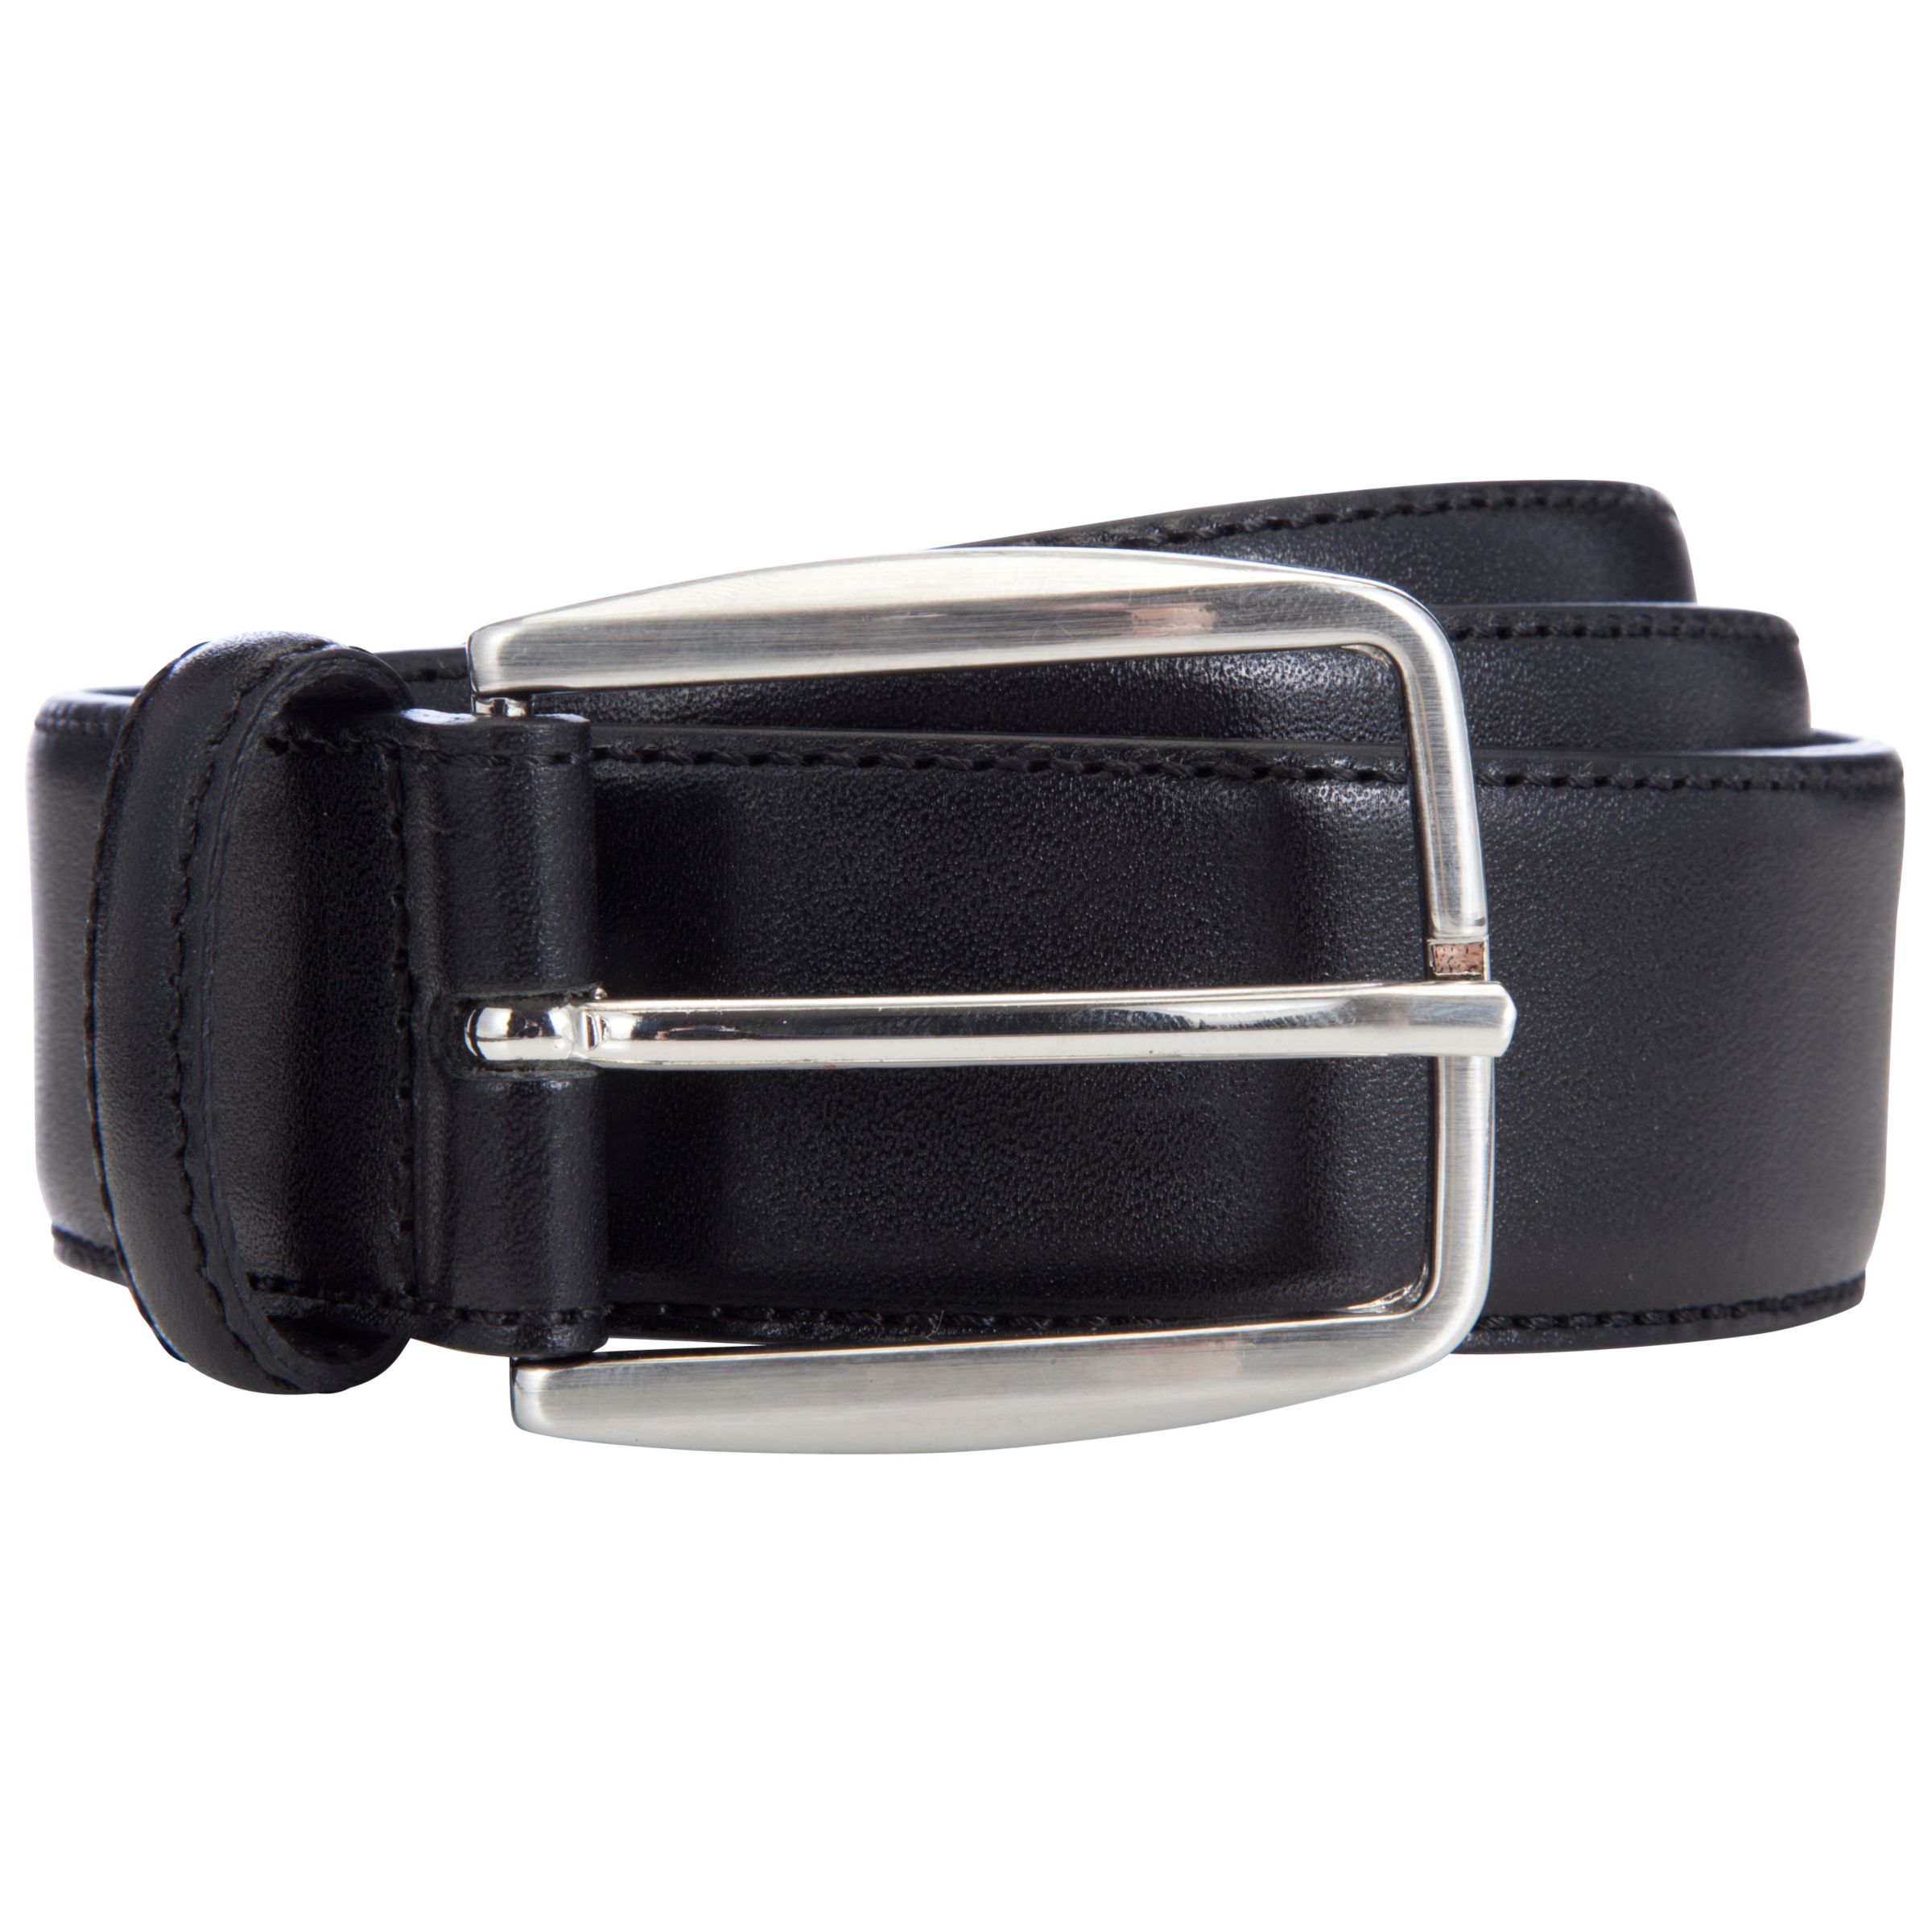 John Lewis & Partners Made in Italy Leather Belt, Black, M